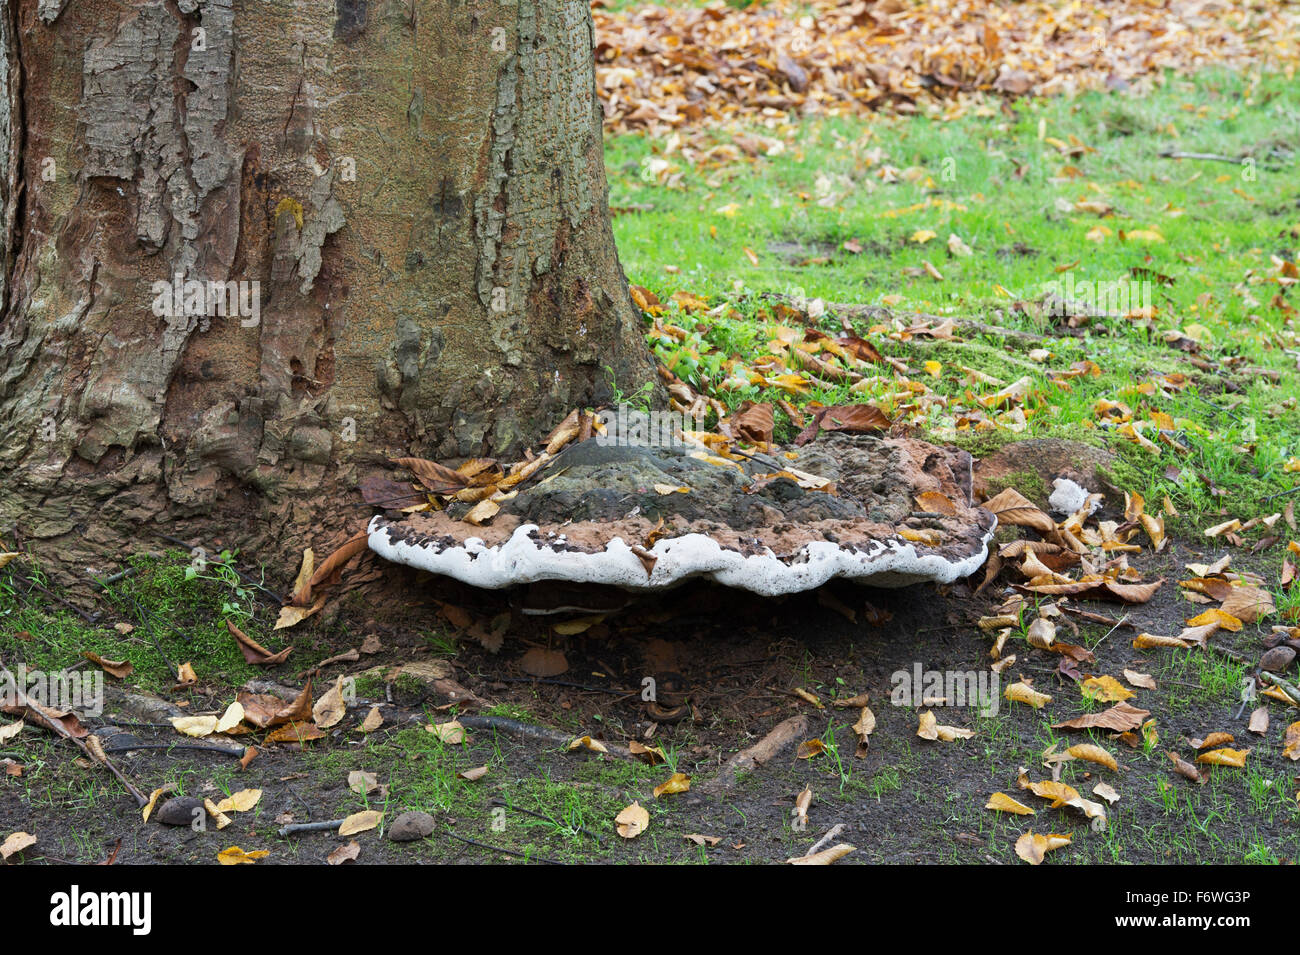 Old bracket fungus at the base of a Japanese horse chestnut tree at RHS Wisley Gardens, Surrey, England Stock Photo